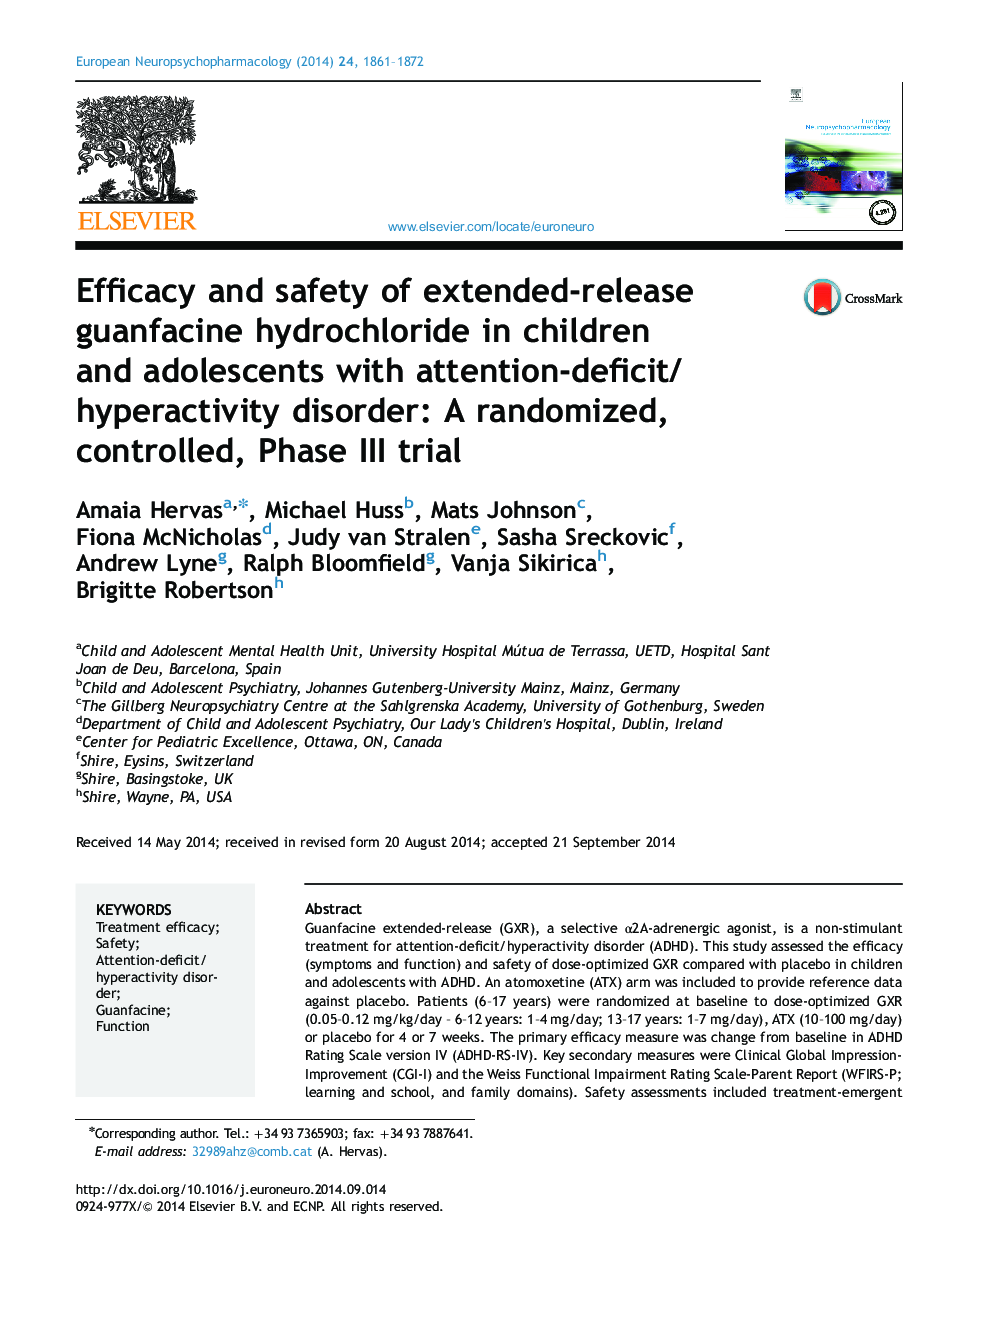 Efficacy and safety of extended-release guanfacine hydrochloride in children and adolescents with attention-deficit/hyperactivity disorder: A randomized, controlled, Phase III trial